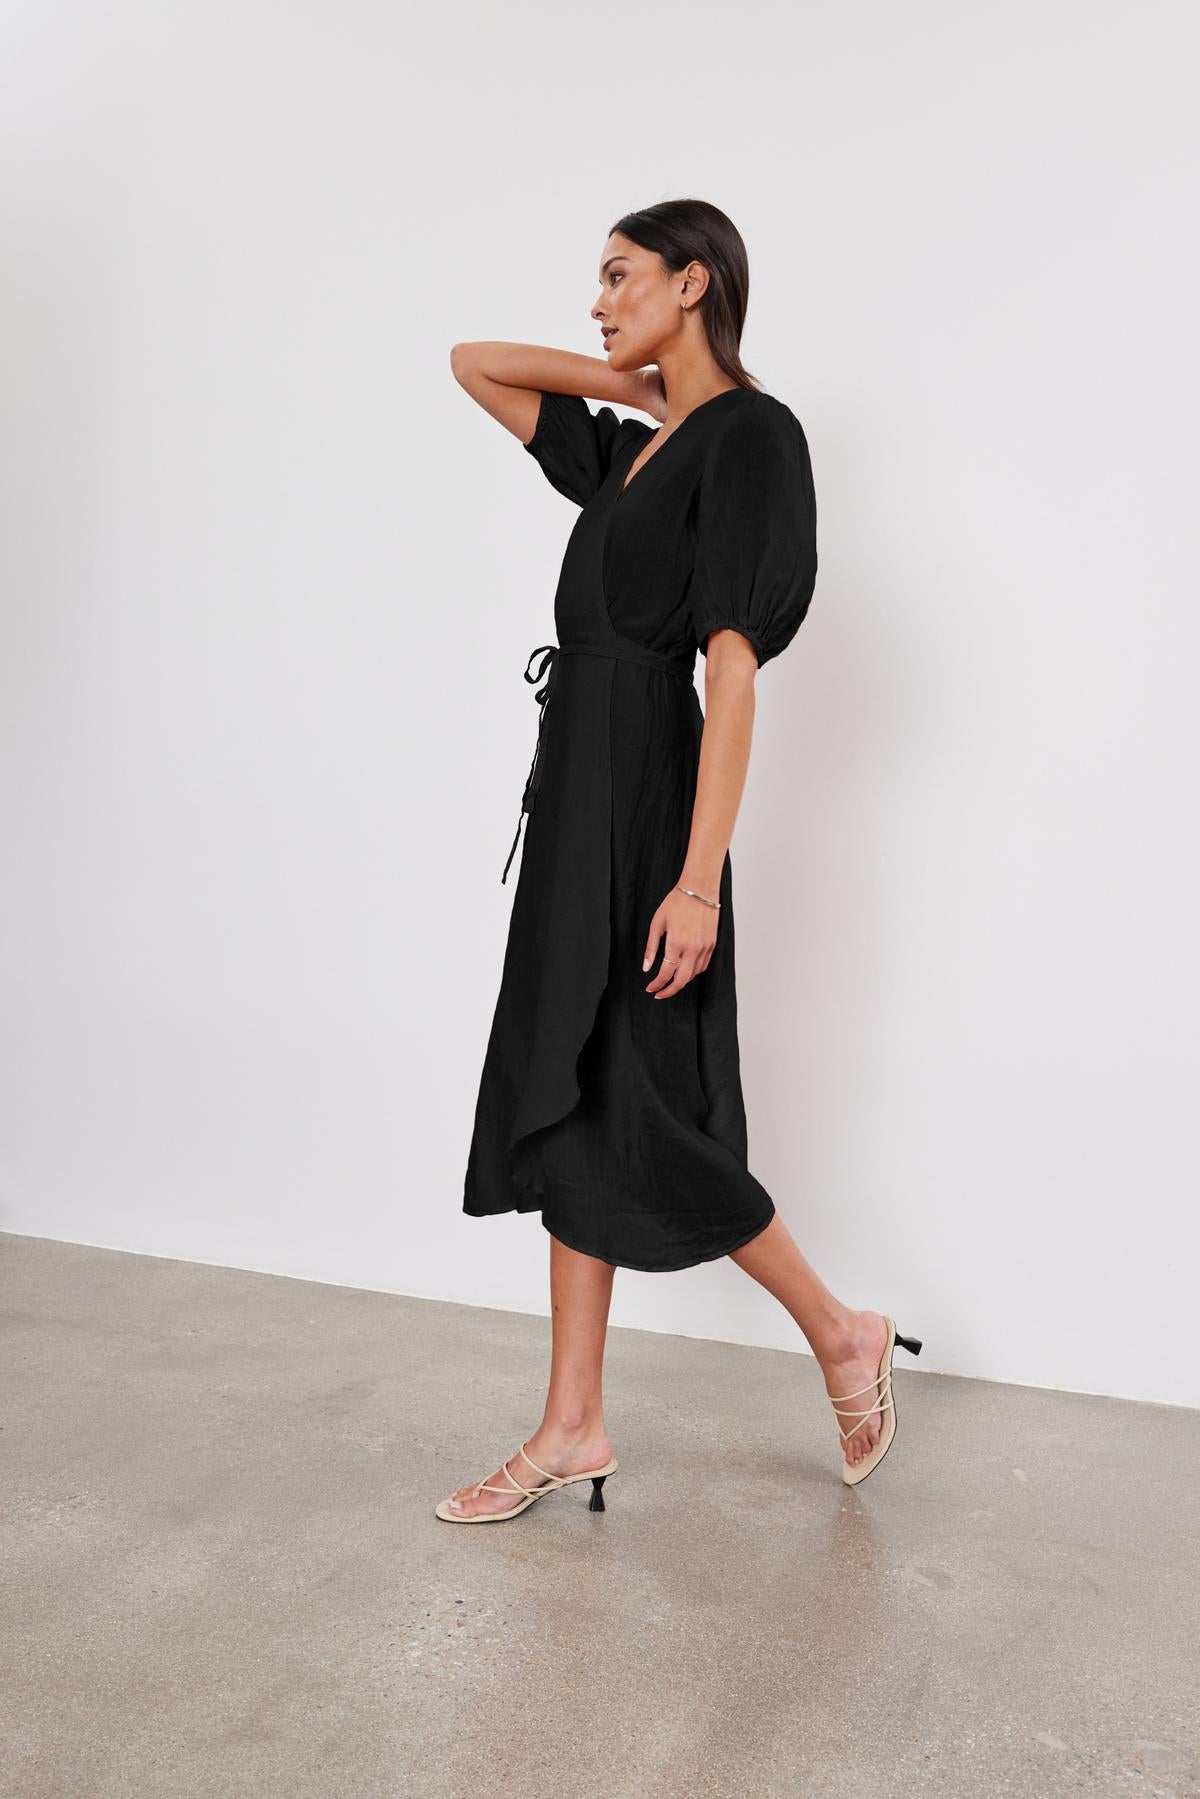   A woman in a black DaLENE LINEN DRESS with puffed sleeves walks in a minimalist space, looking to the side, wearing beige heels. Brand name: Velvet by Graham & Spencer 